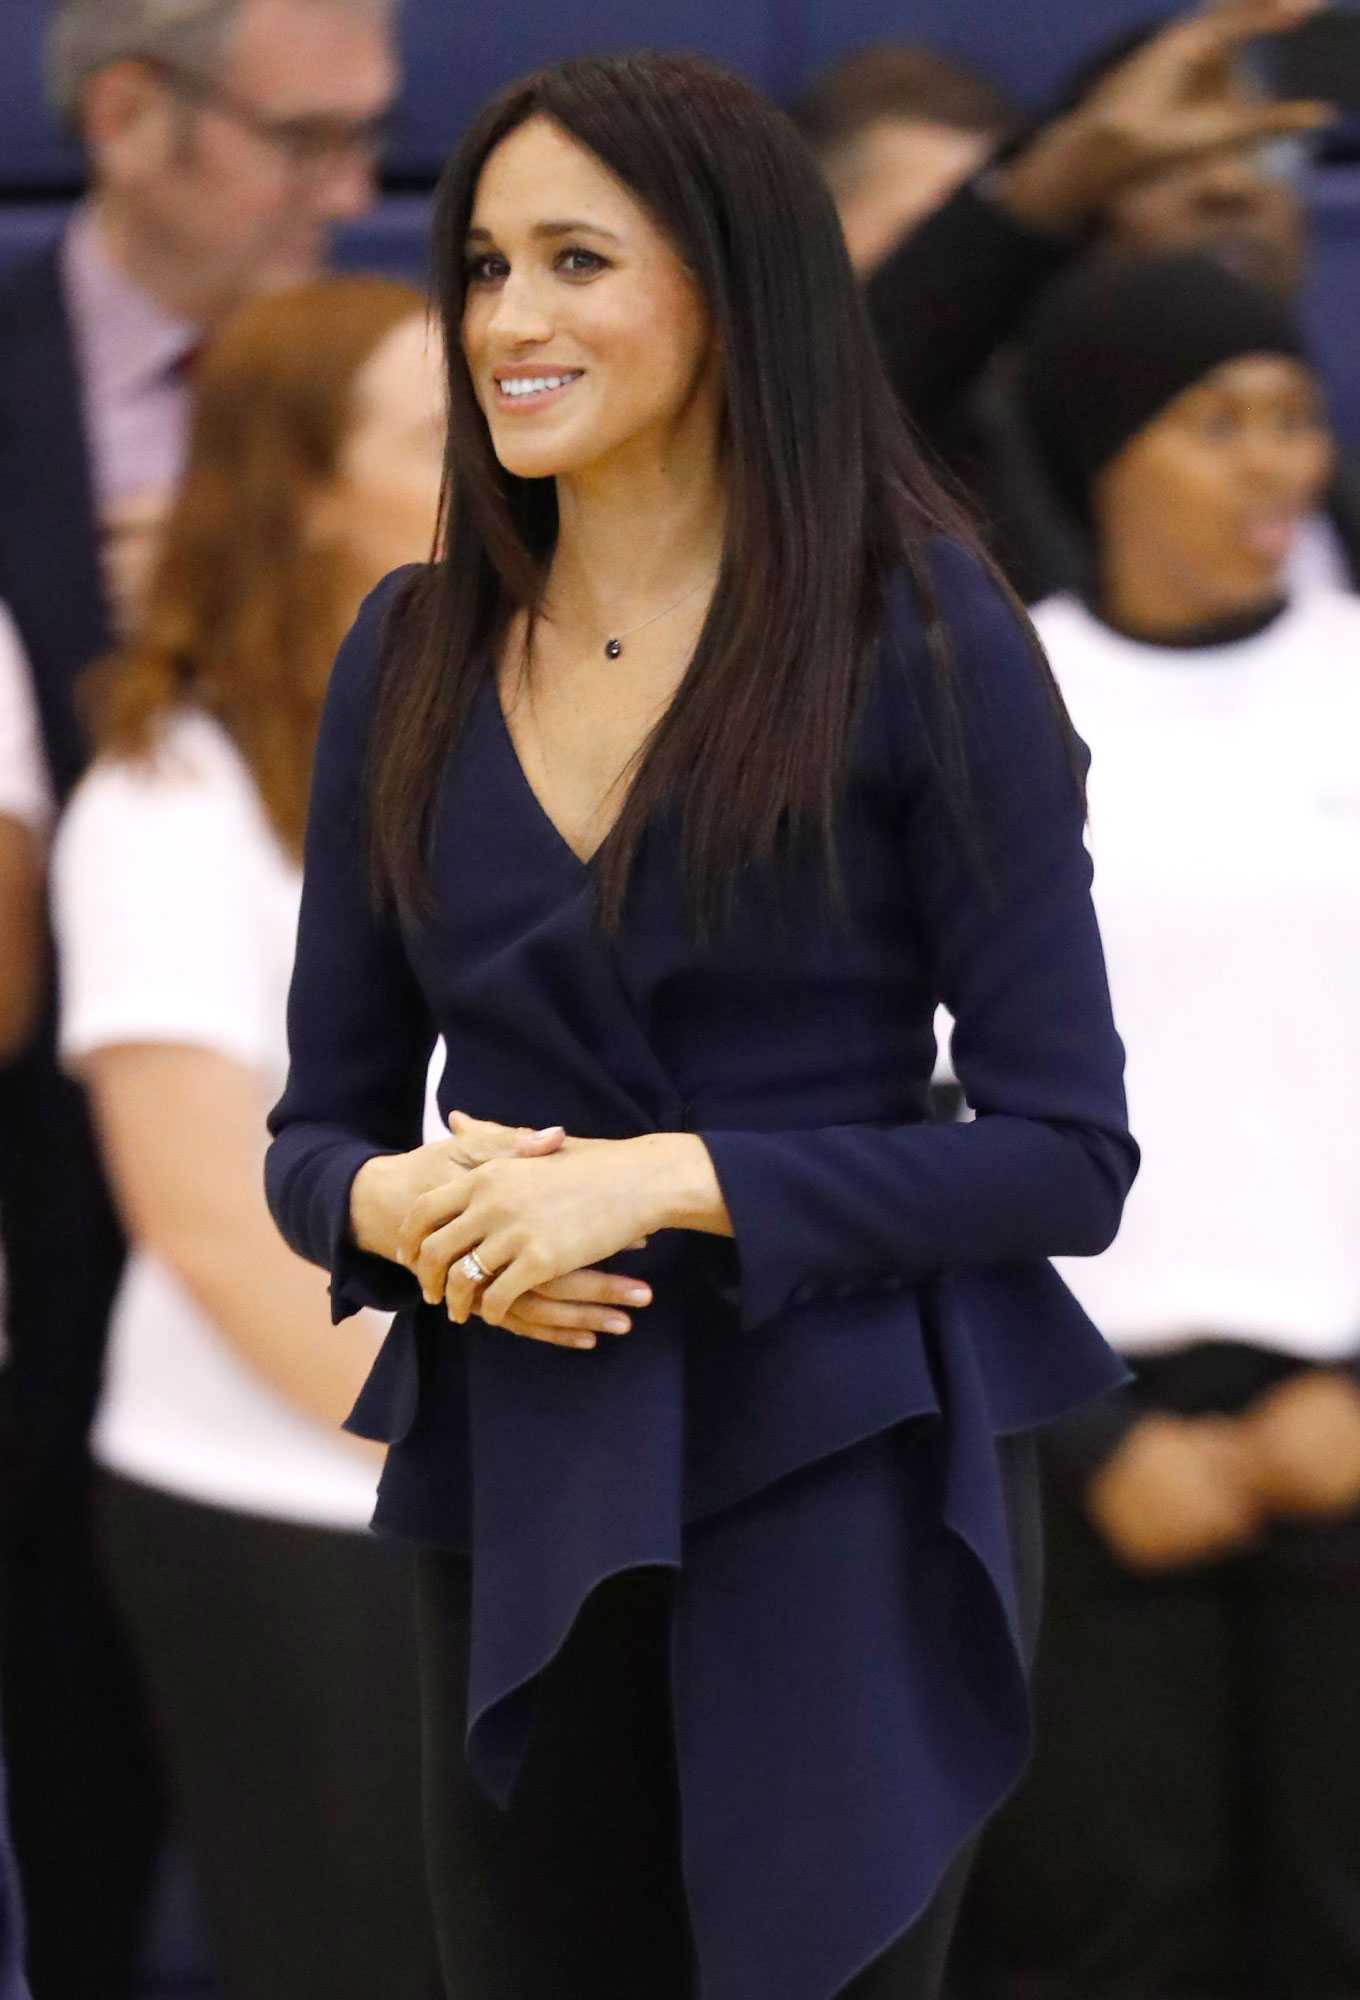 70+ Hot Pictures Of Meghan Markle Which Are Just Too Hot To Handle 653